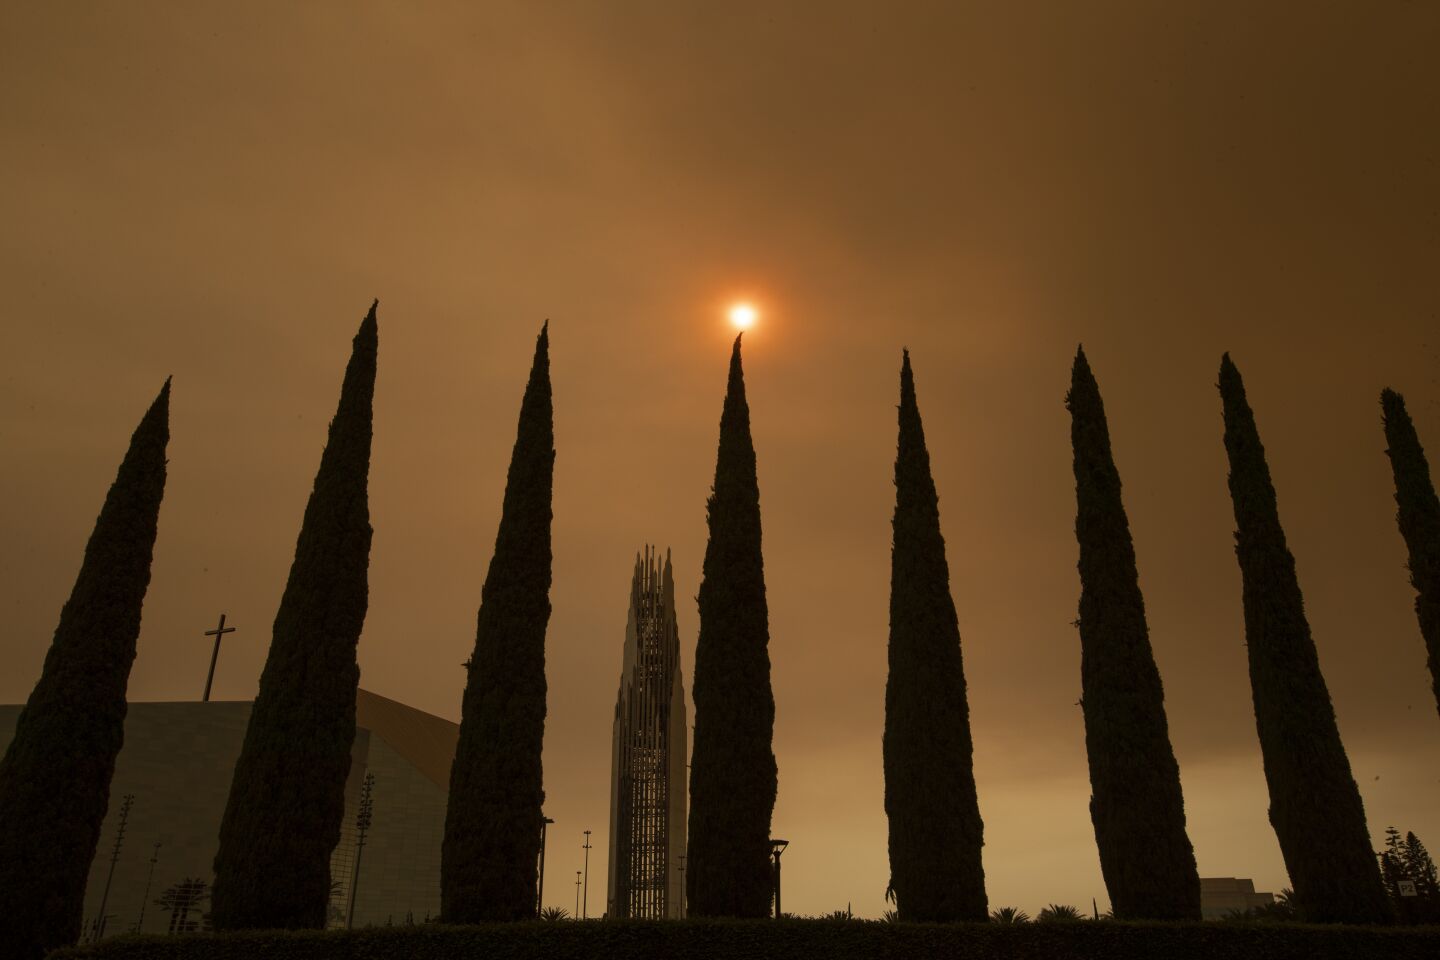 A hazy sun and the Christ Cathedral in Garden Grove.